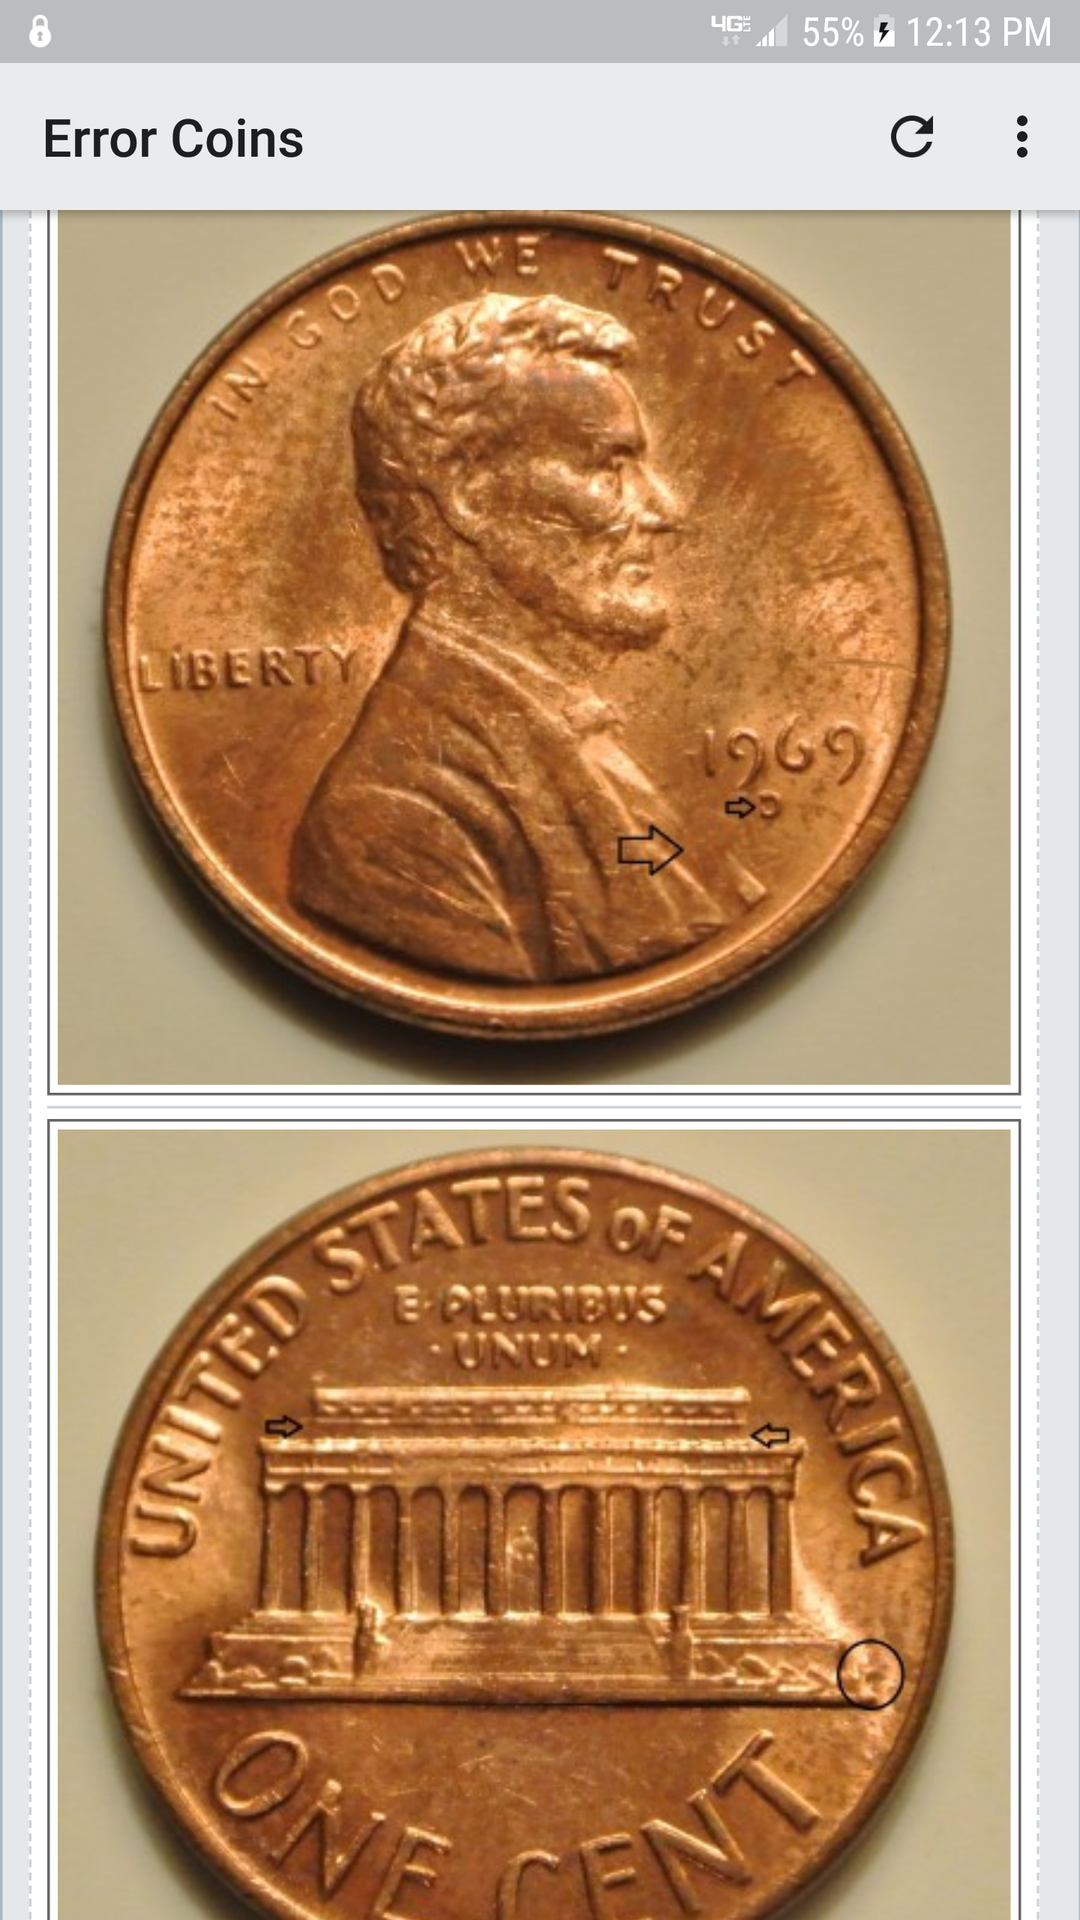 1969 D Penny That Does Have A Floating Roof Coin Talk,Sage Plant Images